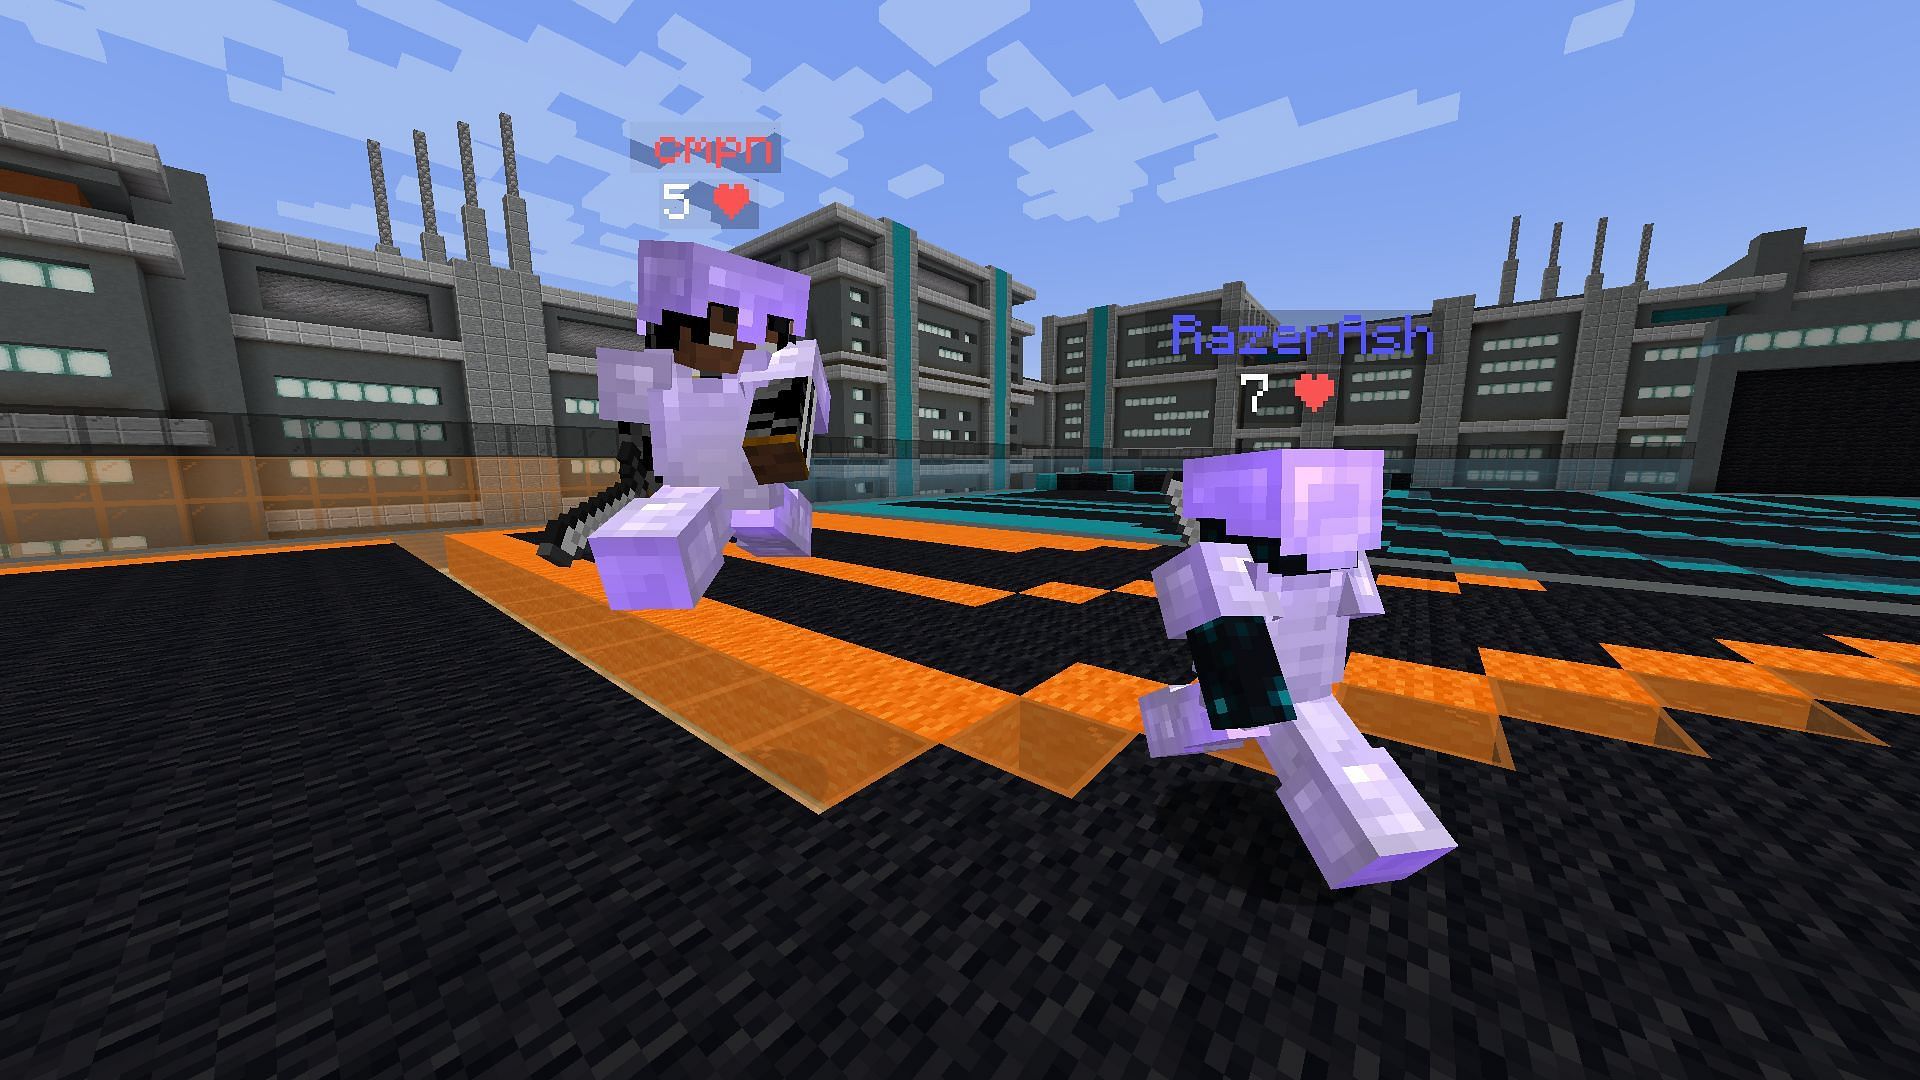 PvP is one of the most famous minigames in thousands of Minecraft servers (Image via Mojang)